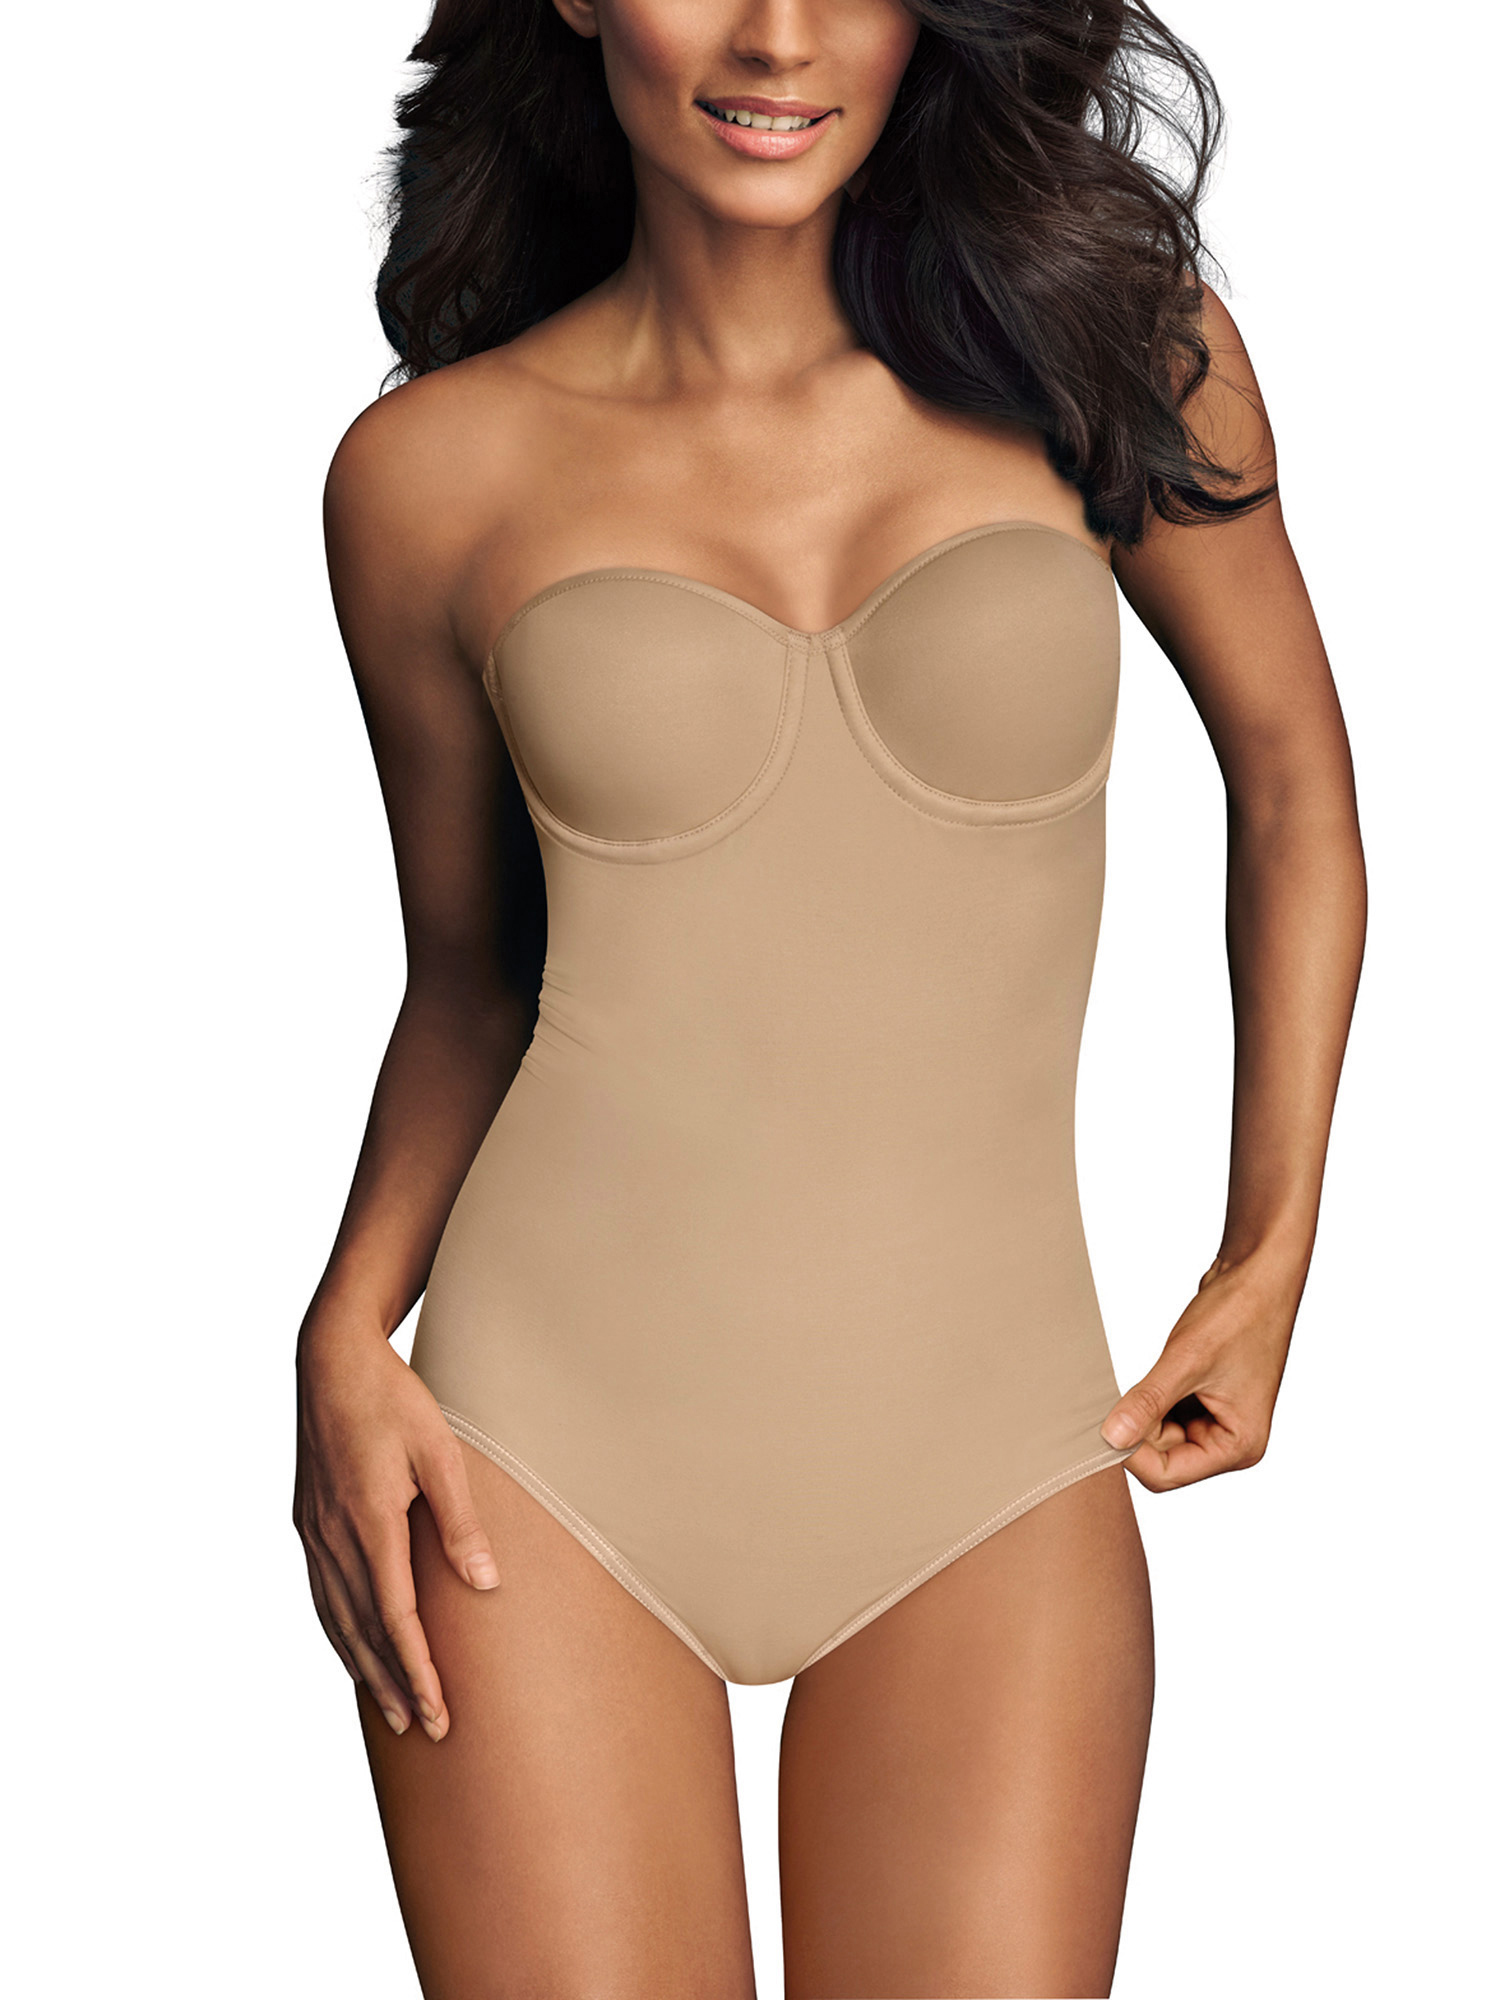 Ultra Firm Strapless Bodybriefer Shapewear by Flexees